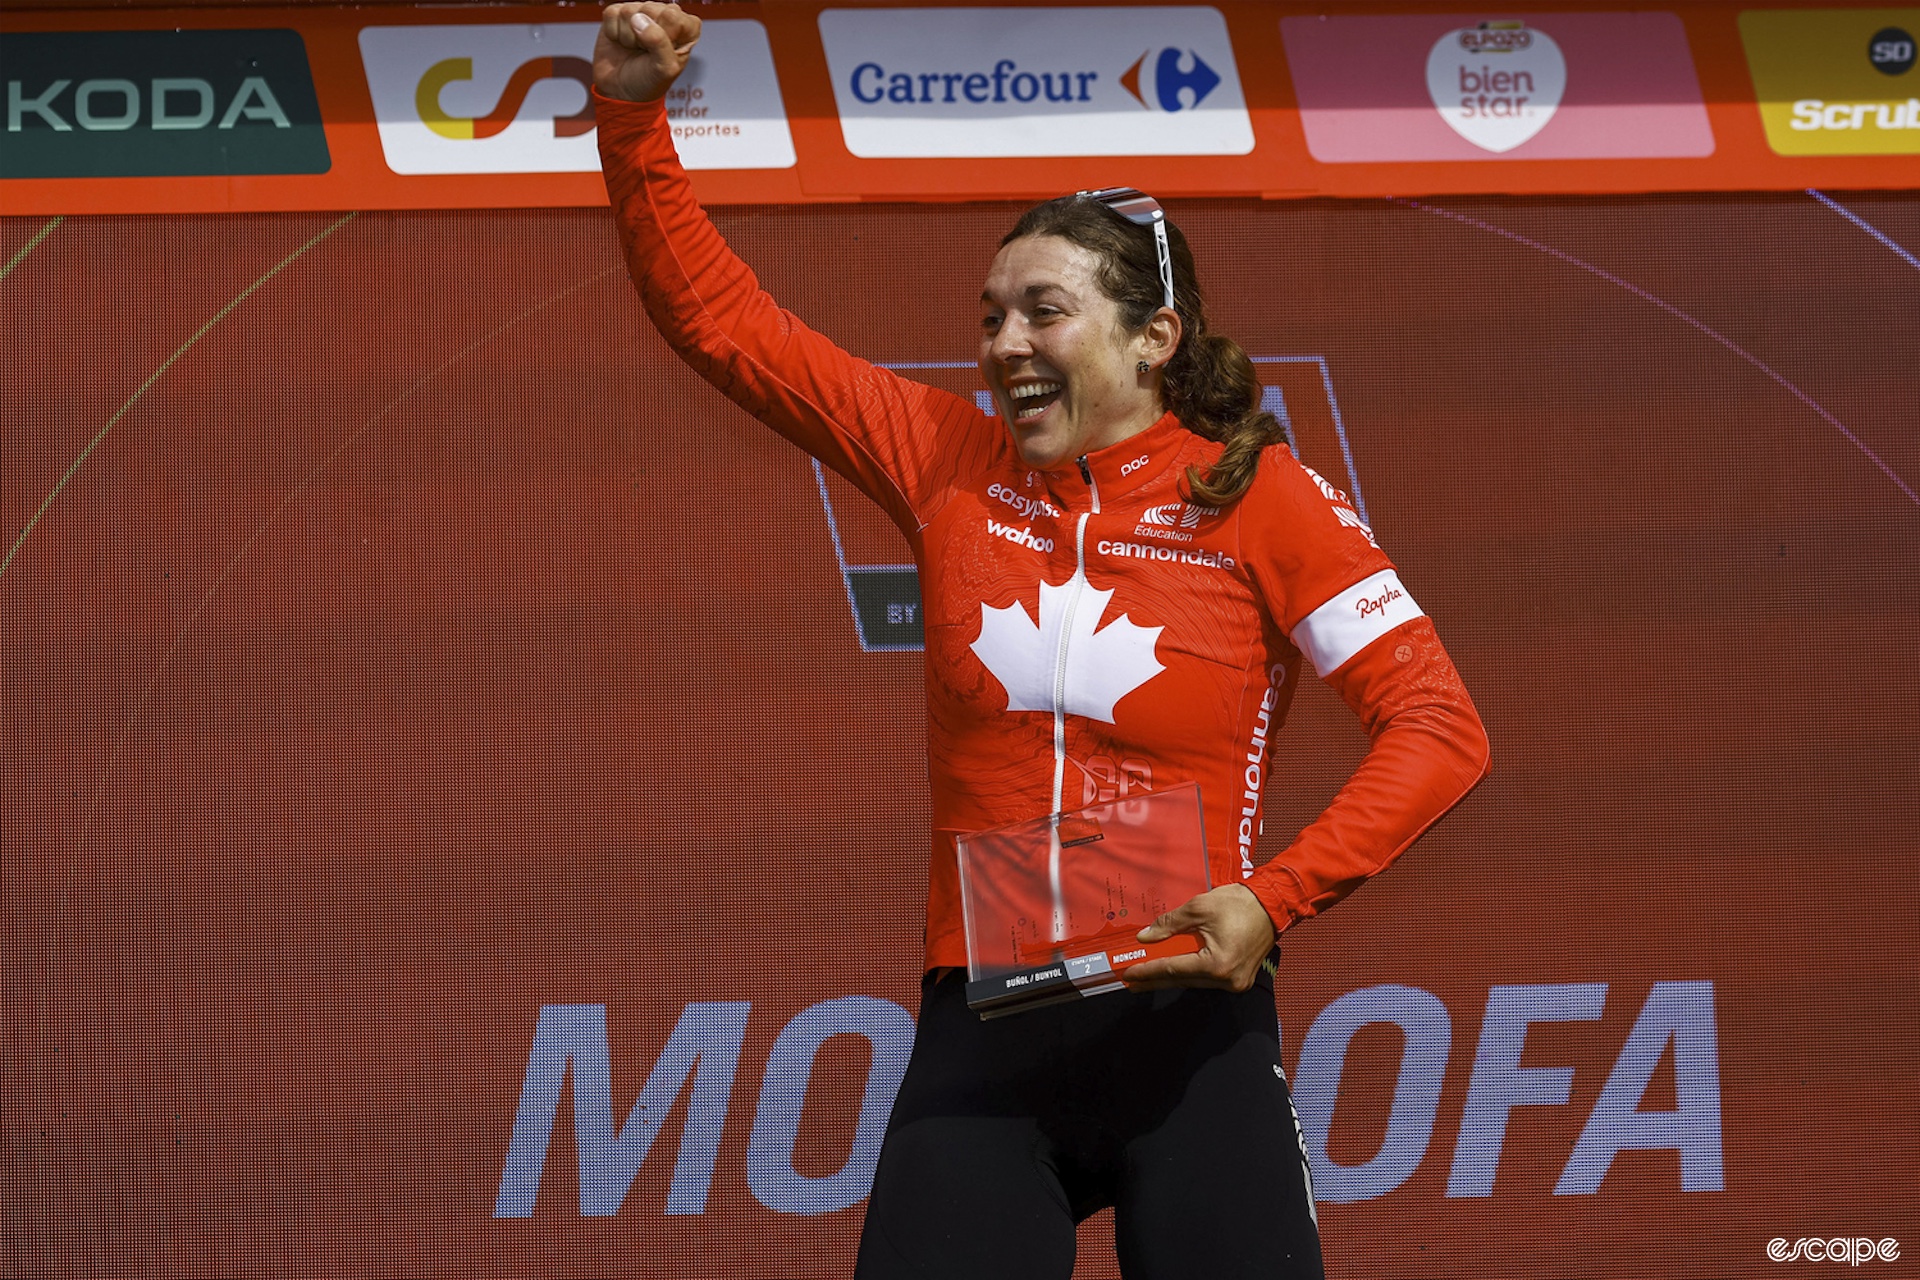 Alison Jackson wears her Canadian flag jersey as she stands on a podium to collect her stage-win prize.